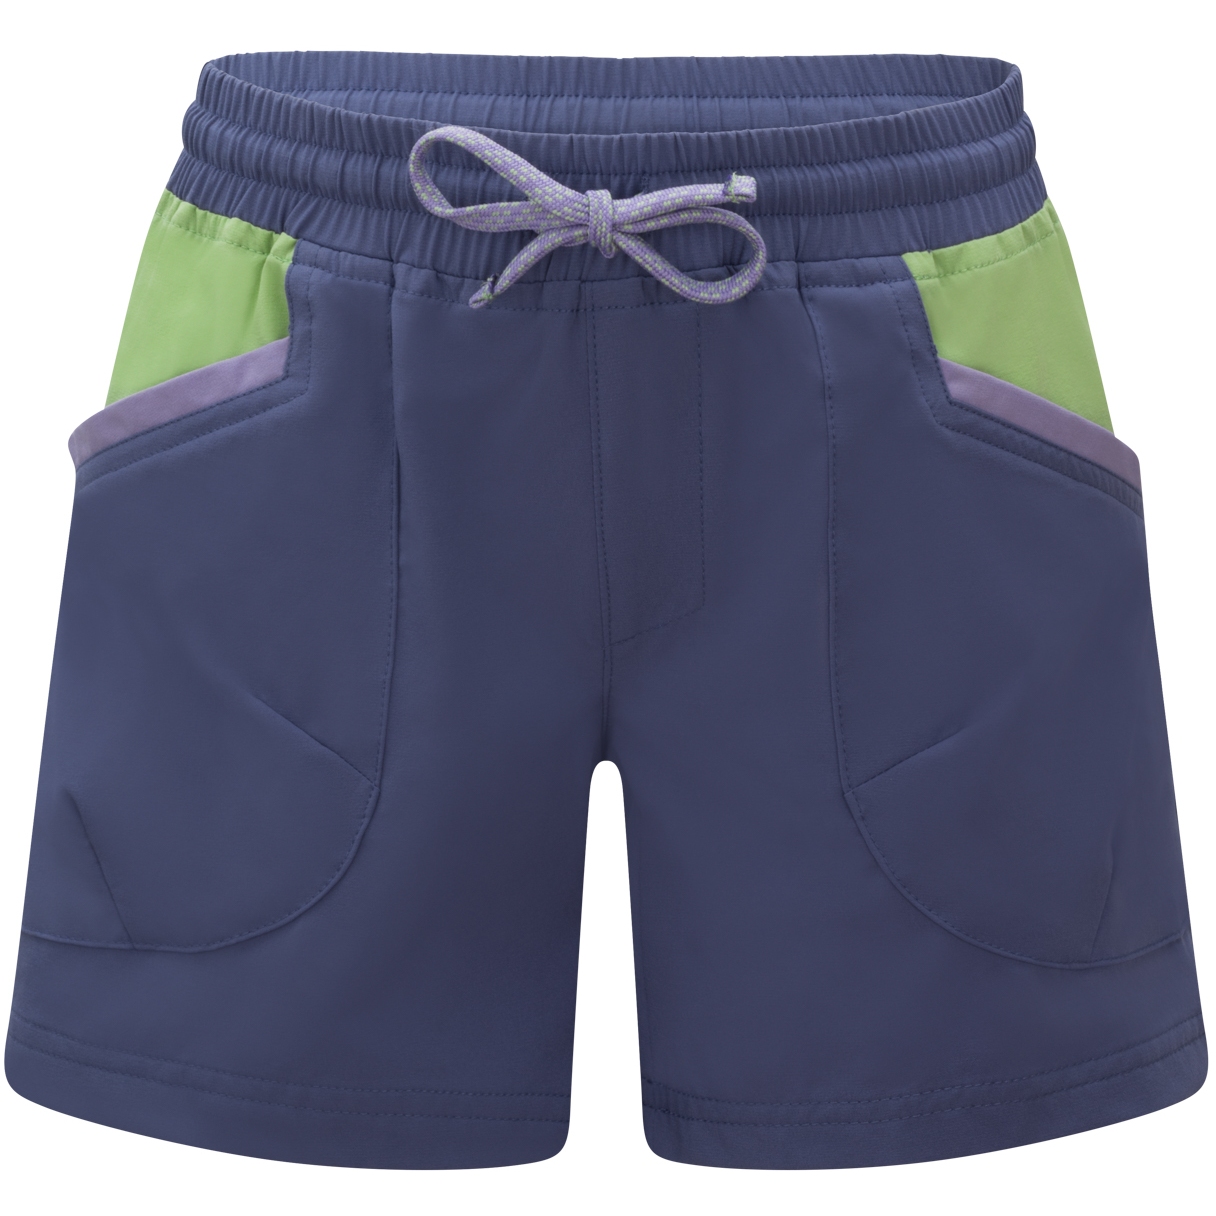 Picture of Trollkids Senja Shorts Girls - violet blue/pistachio green/lilac